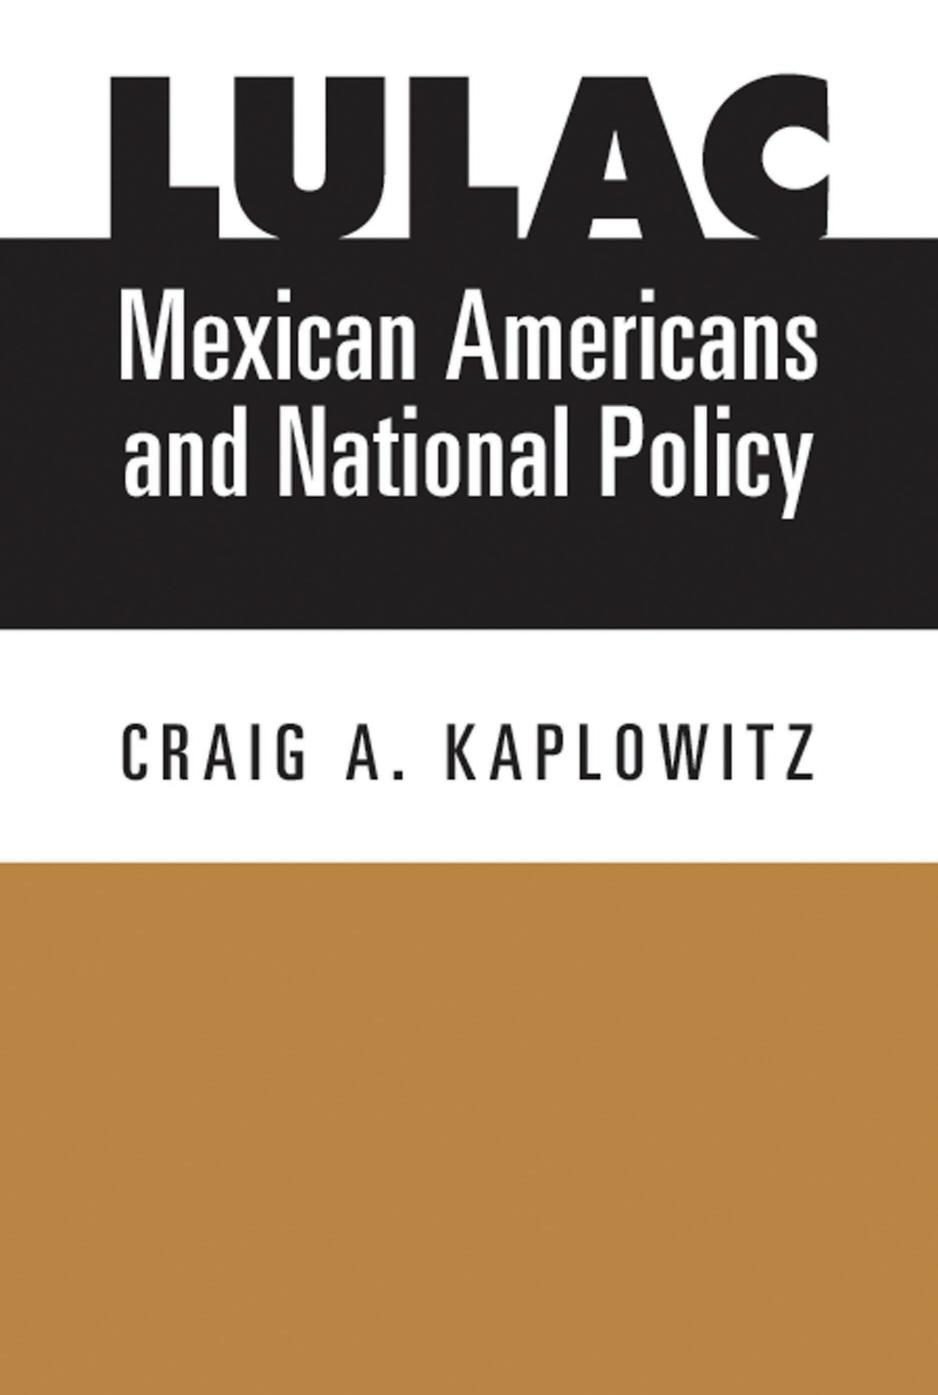 LULAC, Mexican Americans, and National Policy by Craig A. Kaplowitz